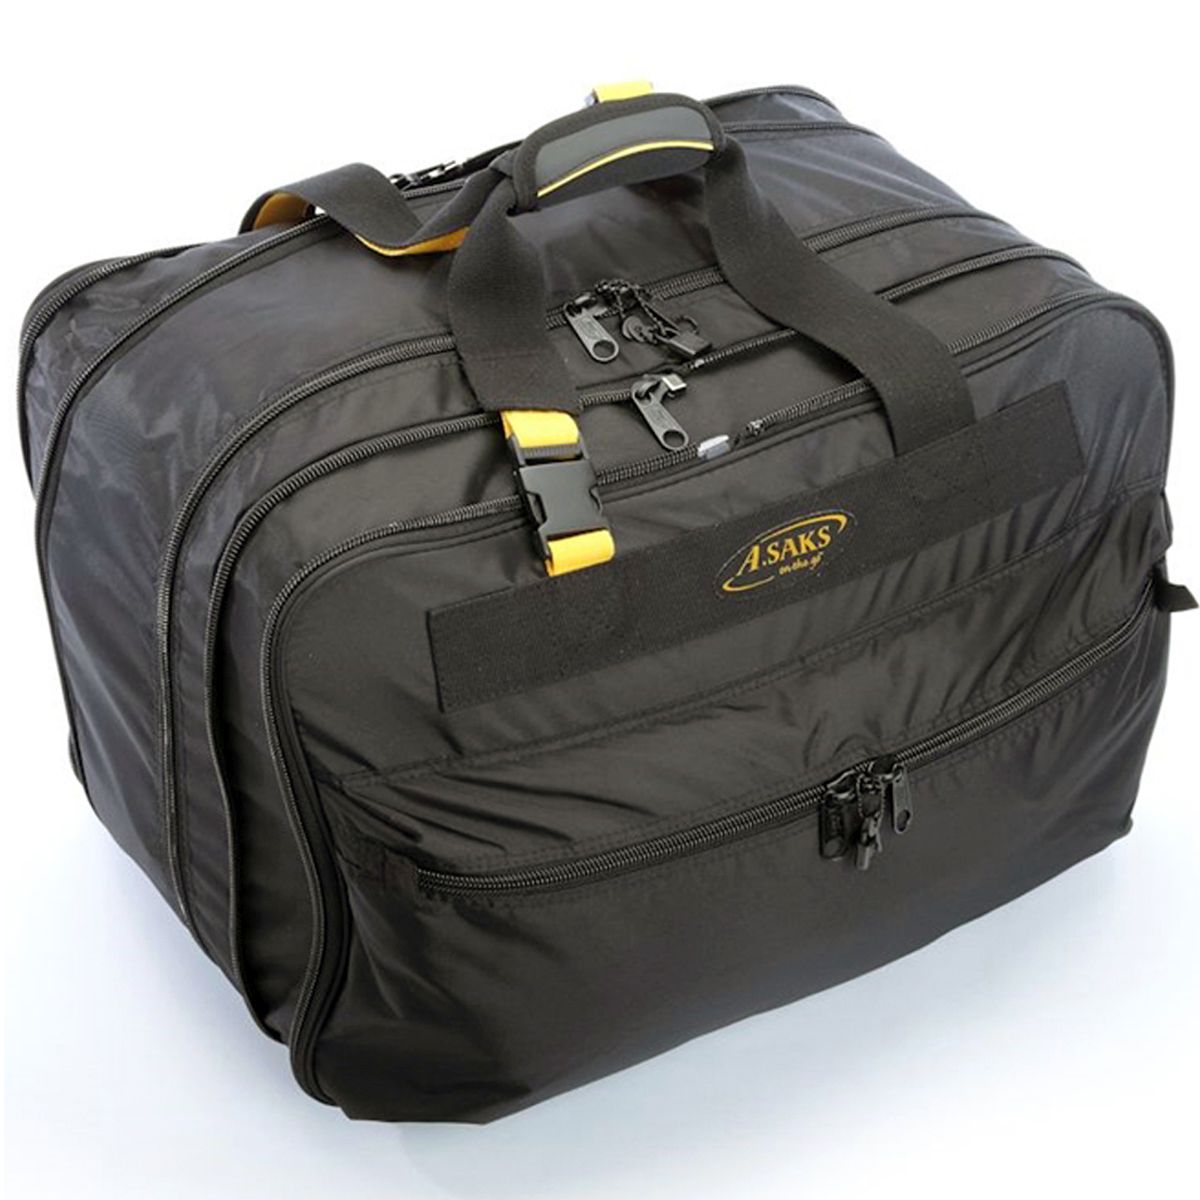 Ae-21 Expanadable 21 Inch Carry-on Bag